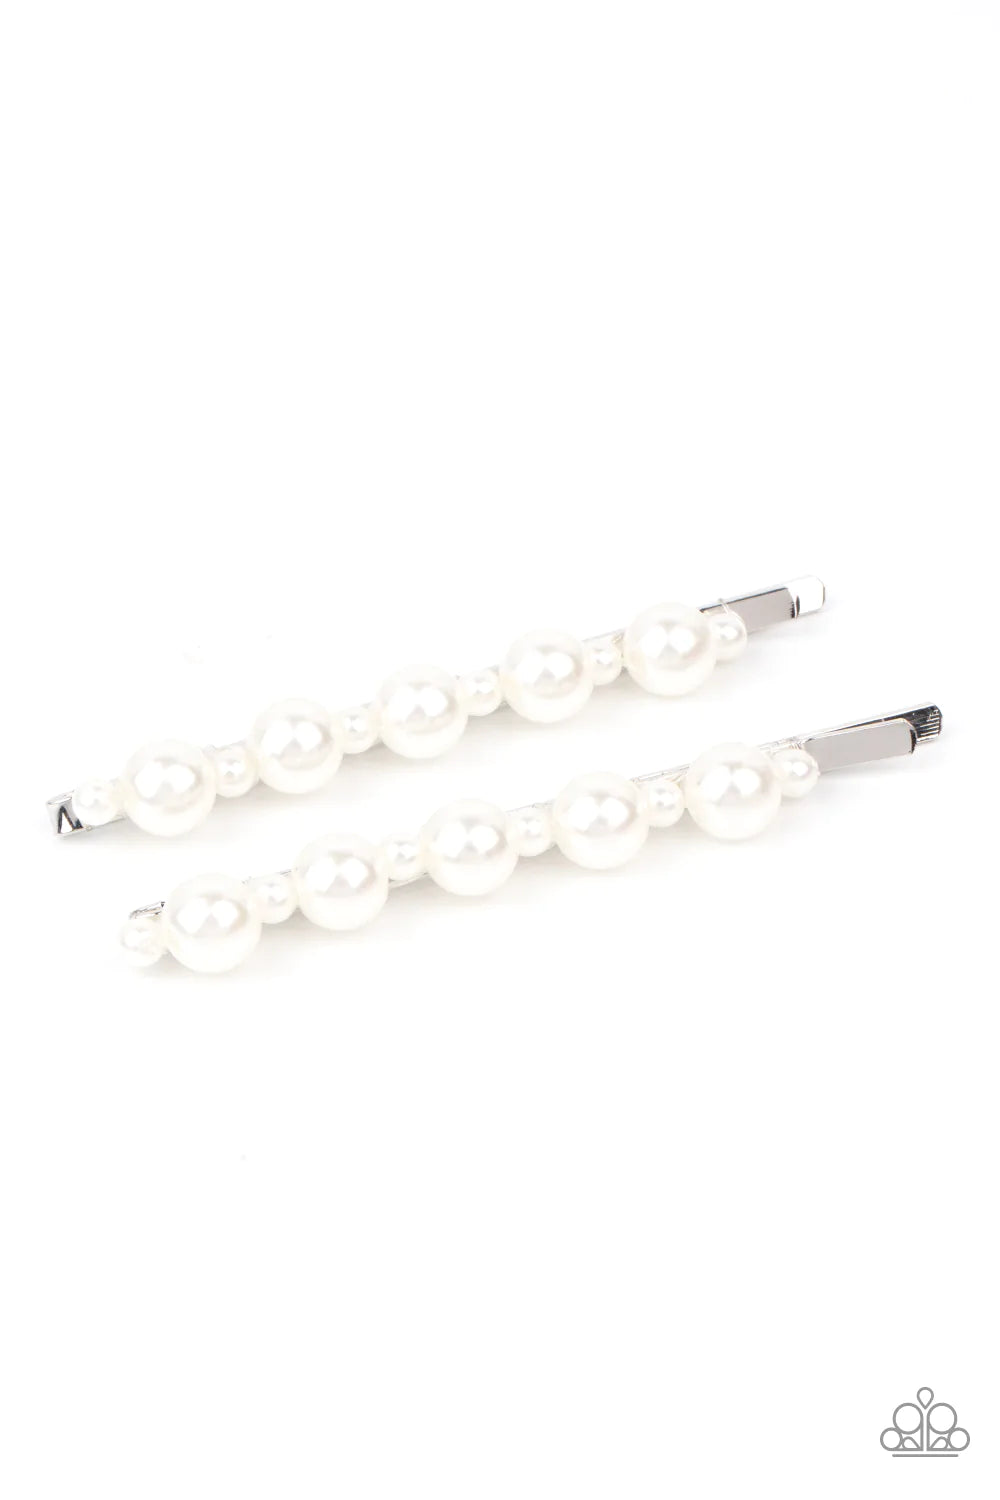 Paparazzi Accessories Put a Pin In It - White Dainty and classic pearls alternate along a pair of silver bobby pins, creating a bubbly display. Sold as one pair of decorative bobby pins. Hair Accessories